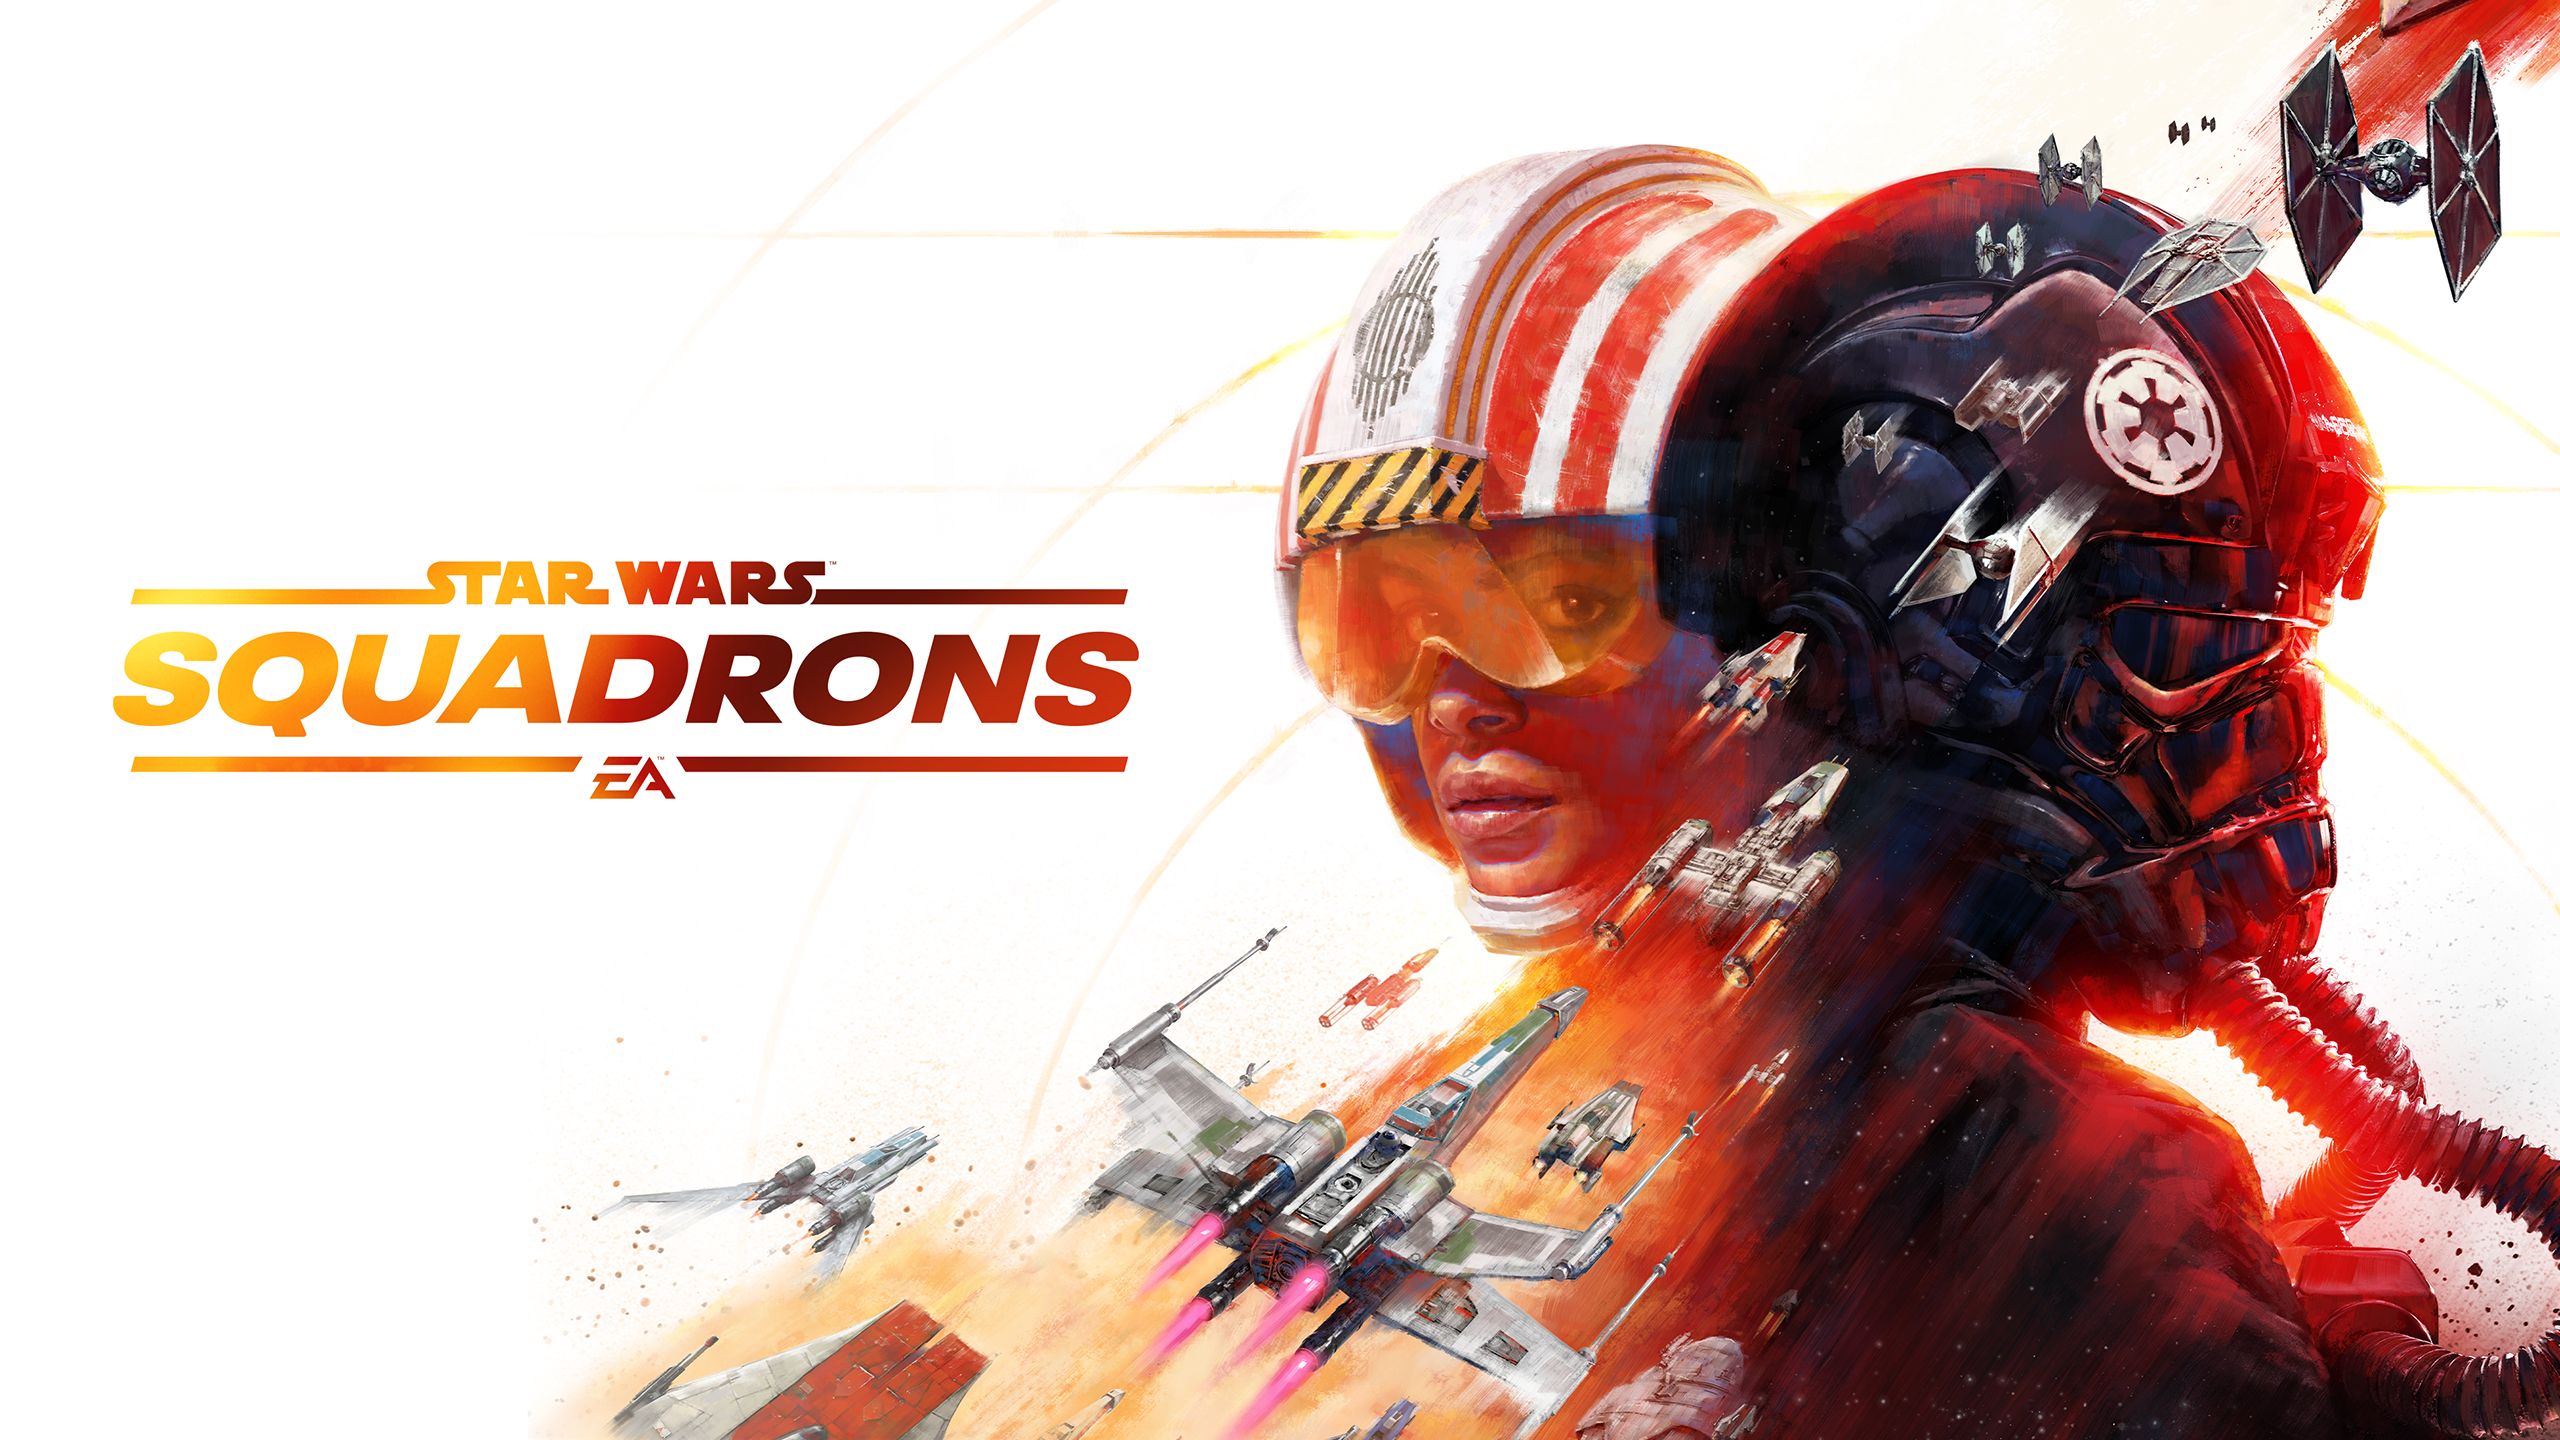 FREE STAR WARS: Squadrons PC game (Don't pay $49) @ Epic Games